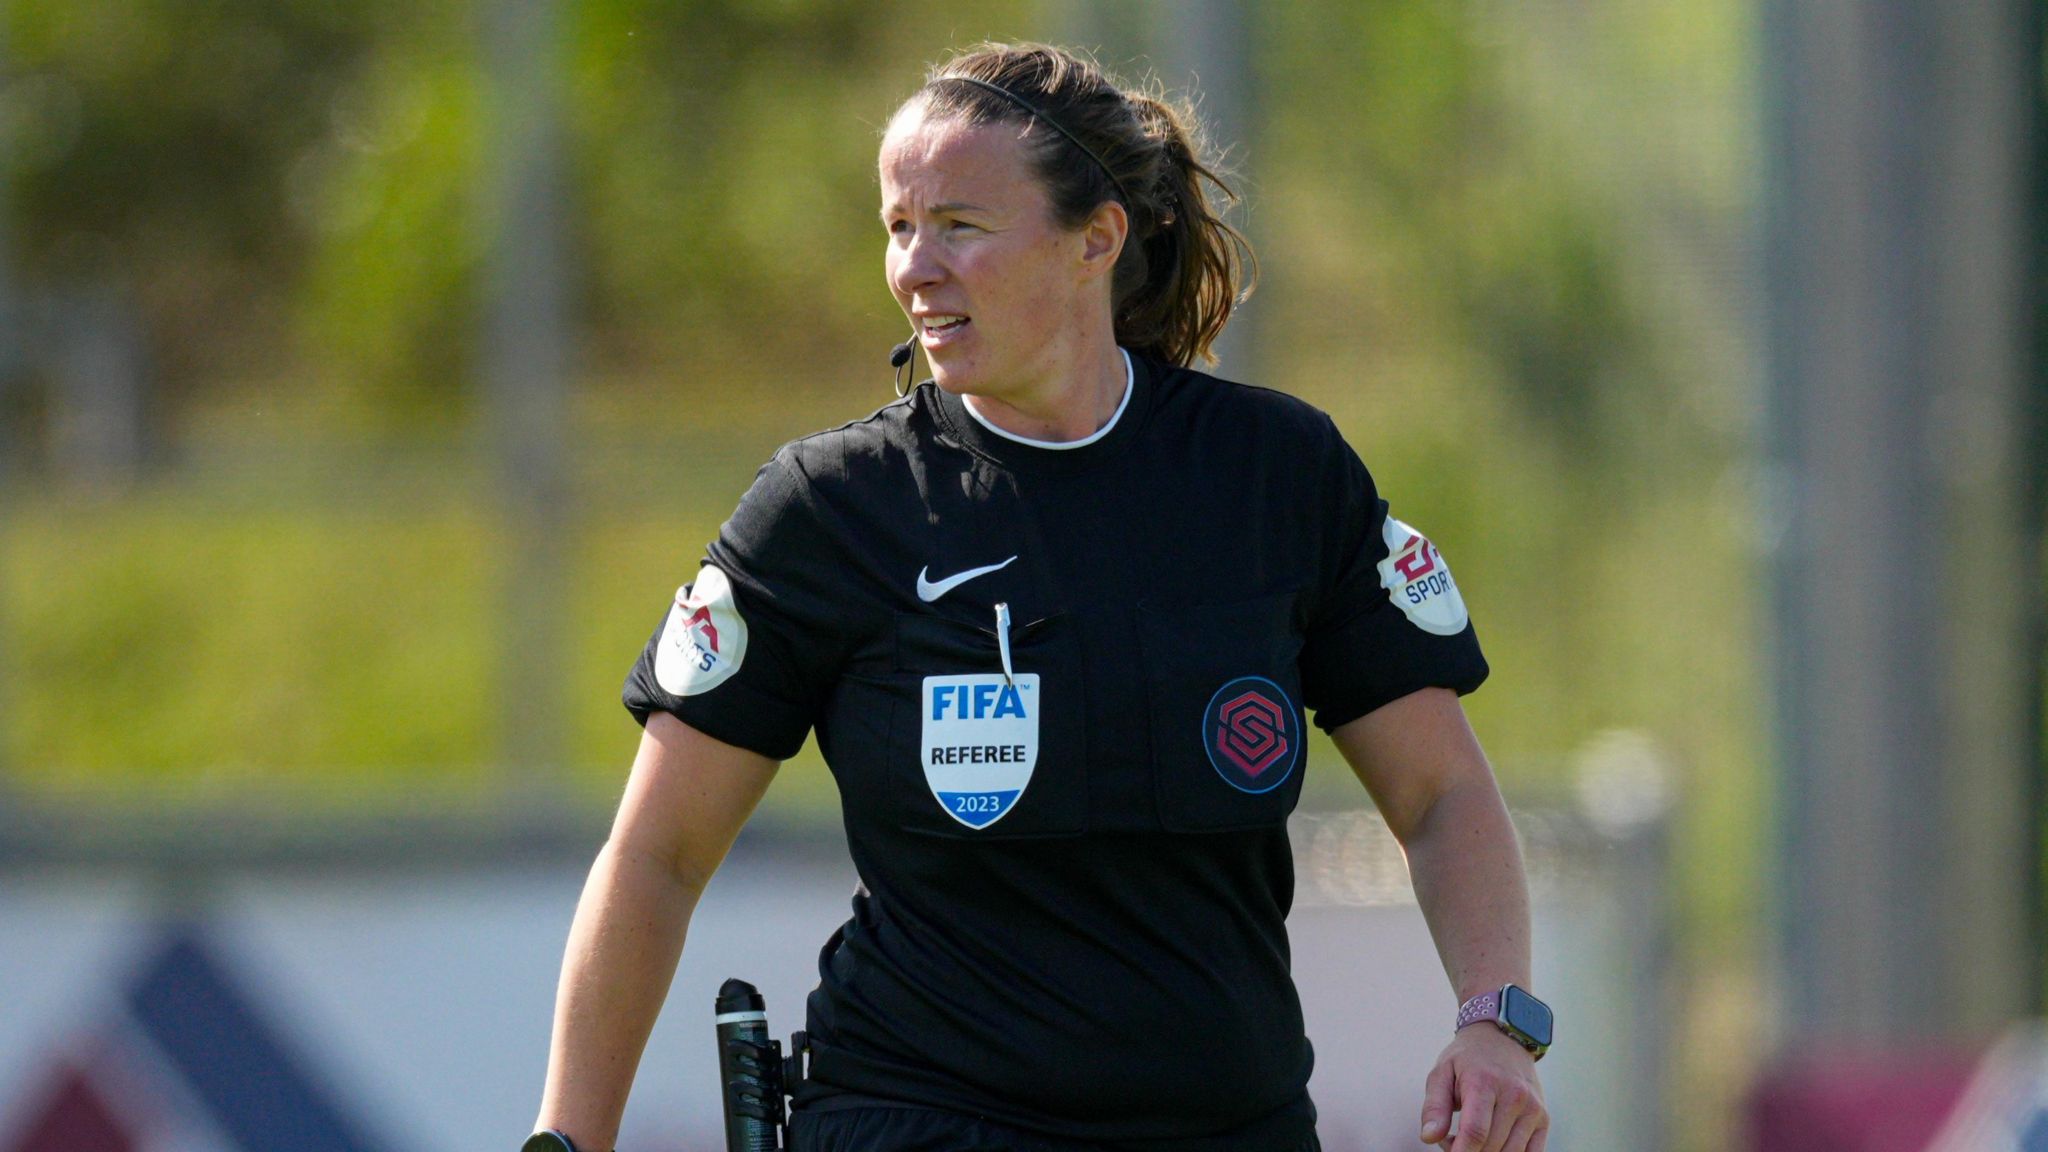 Referee Stacey Pearson